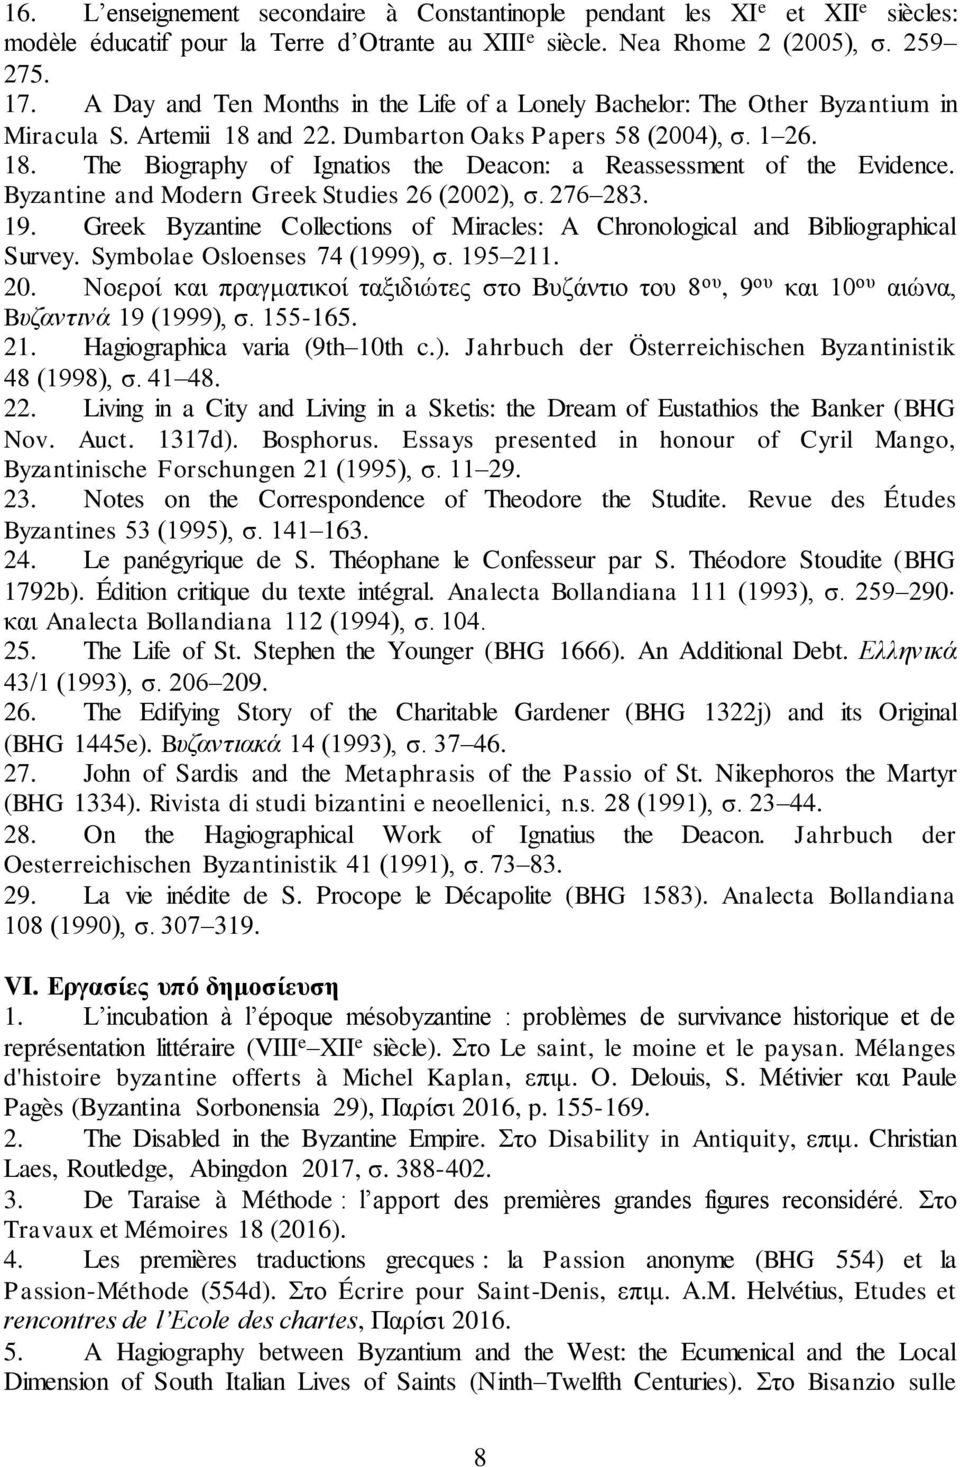 Byzantine and Modern Greek Studies 26 (2002), σ. 276 283. 19. Greek Byzantine Collections of Miracles: A Chronological and Bibliographical Survey. Symbolae Osloenses 74 (1999), σ. 195 211. 20.